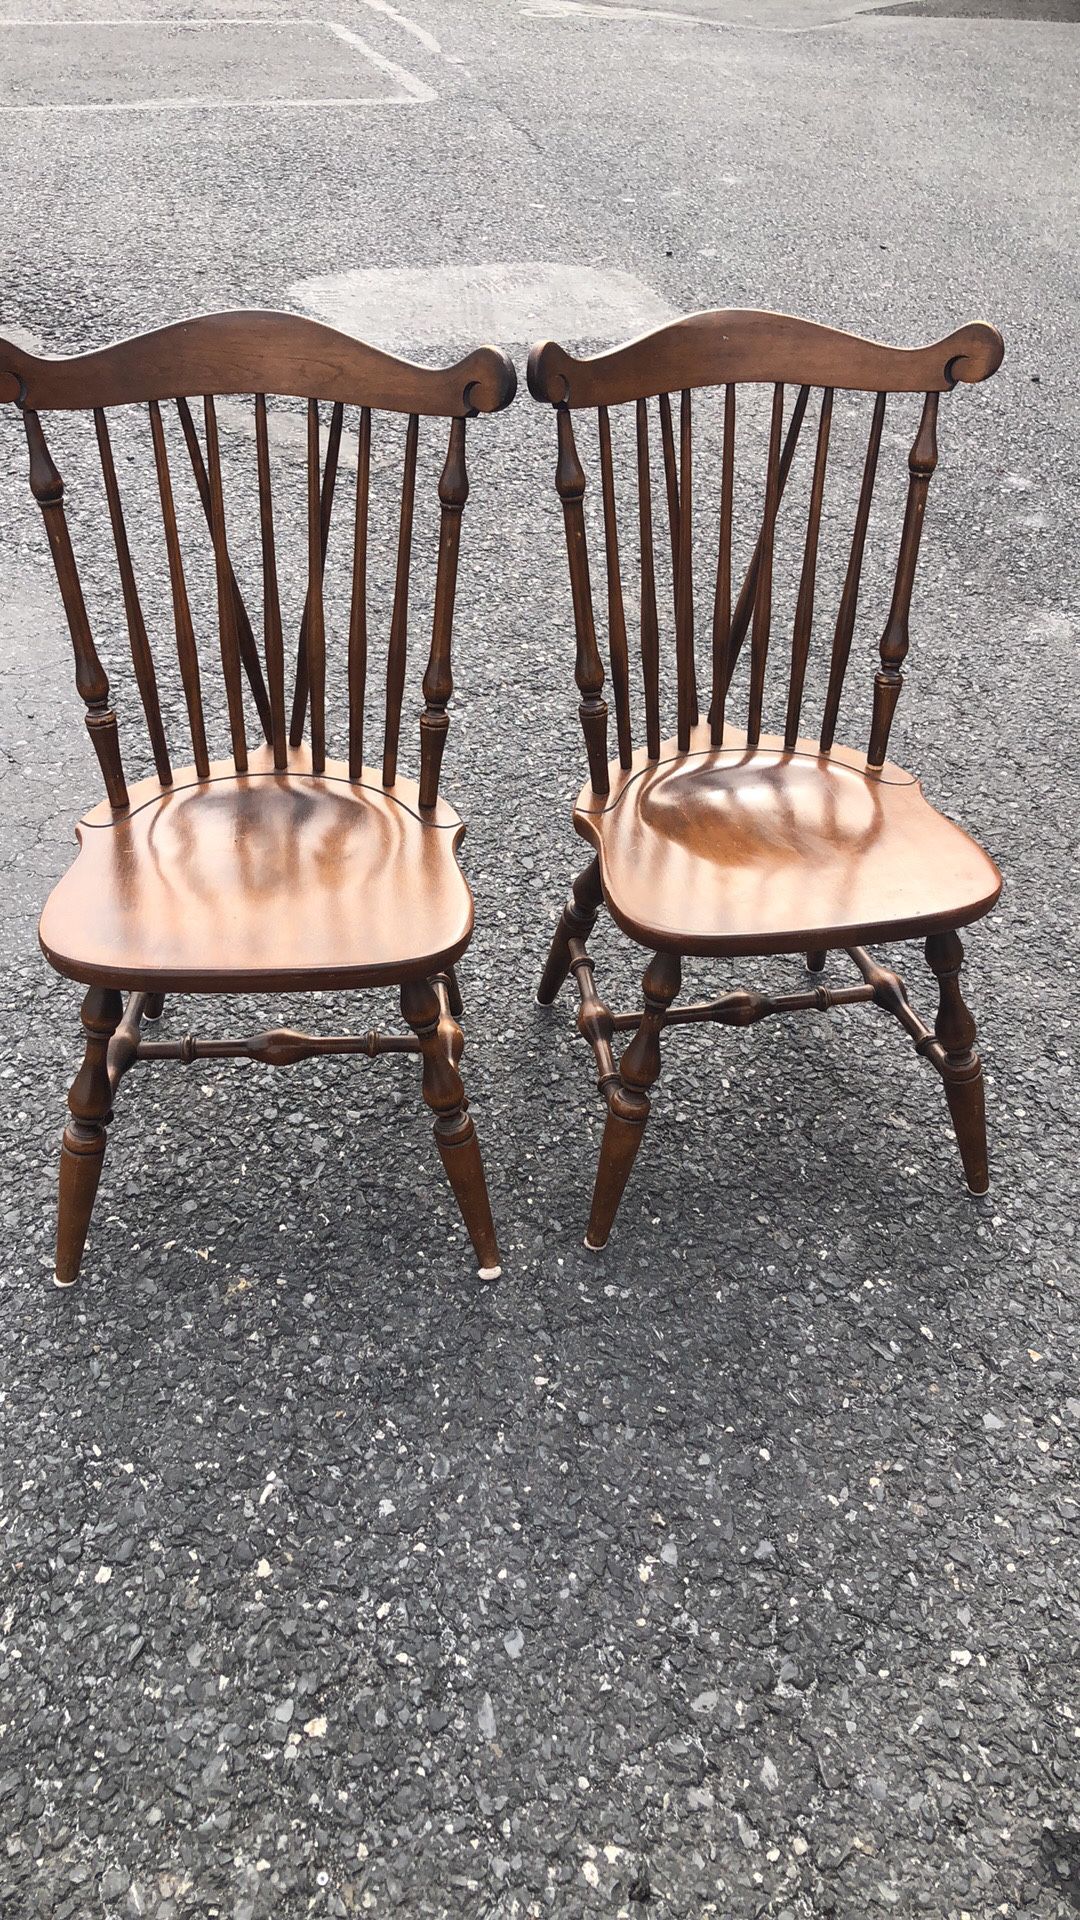 2 solid wood chairs